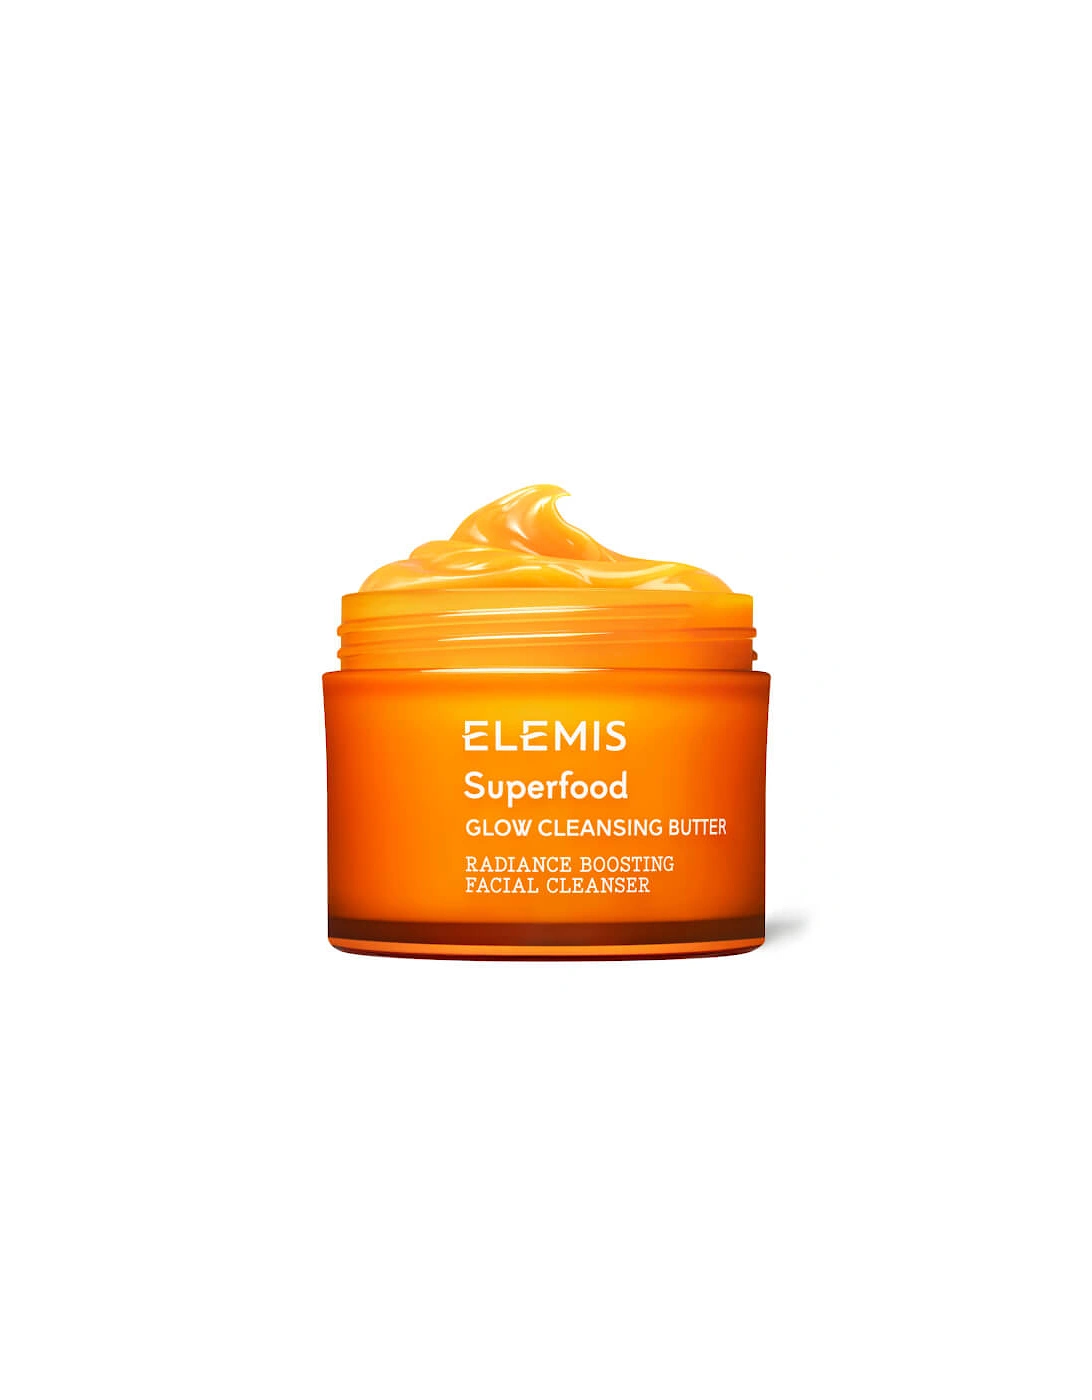 Supersize Superfood Glow Cleansing Butter 200g - Elemis, 2 of 1